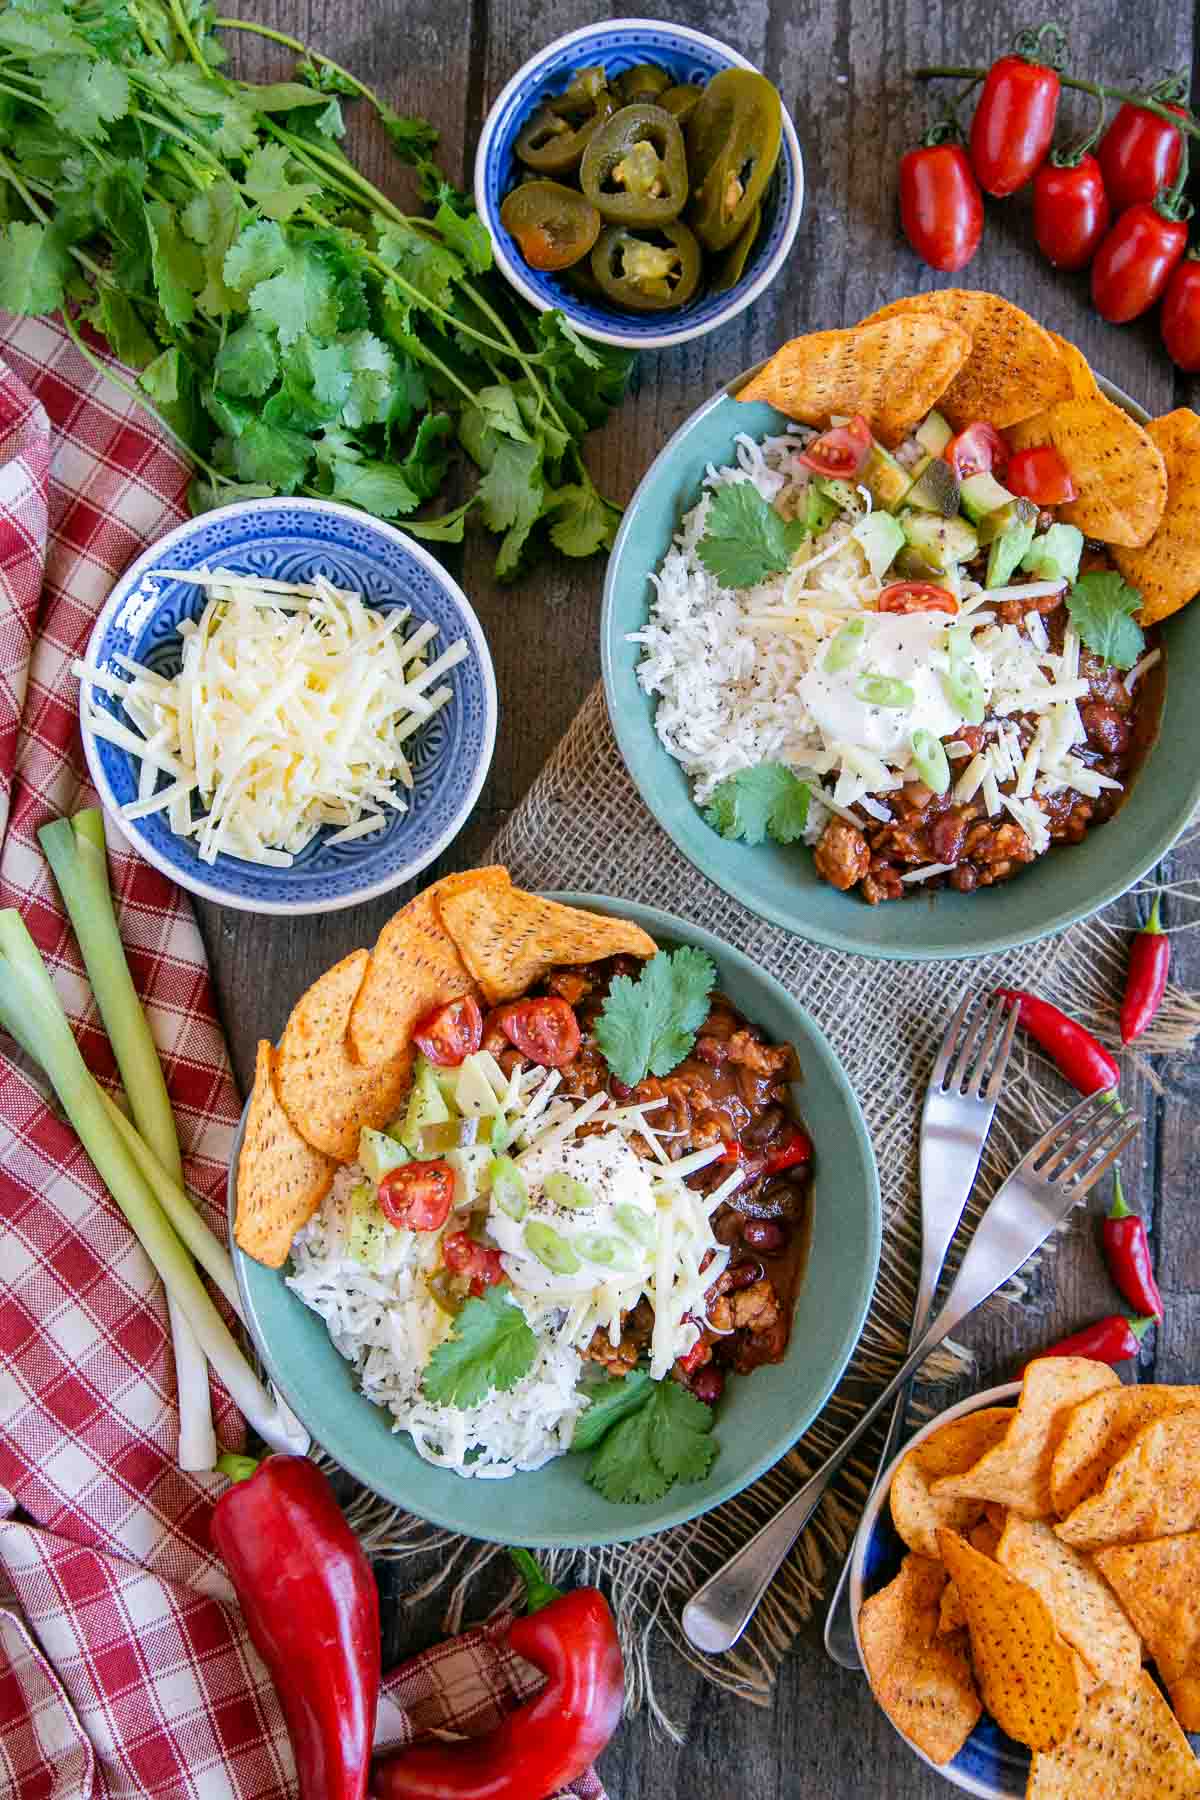 Bowls of slow cooker ground turkey chili with a range of toppings - cheese, spring onions, pickled chilies and more.